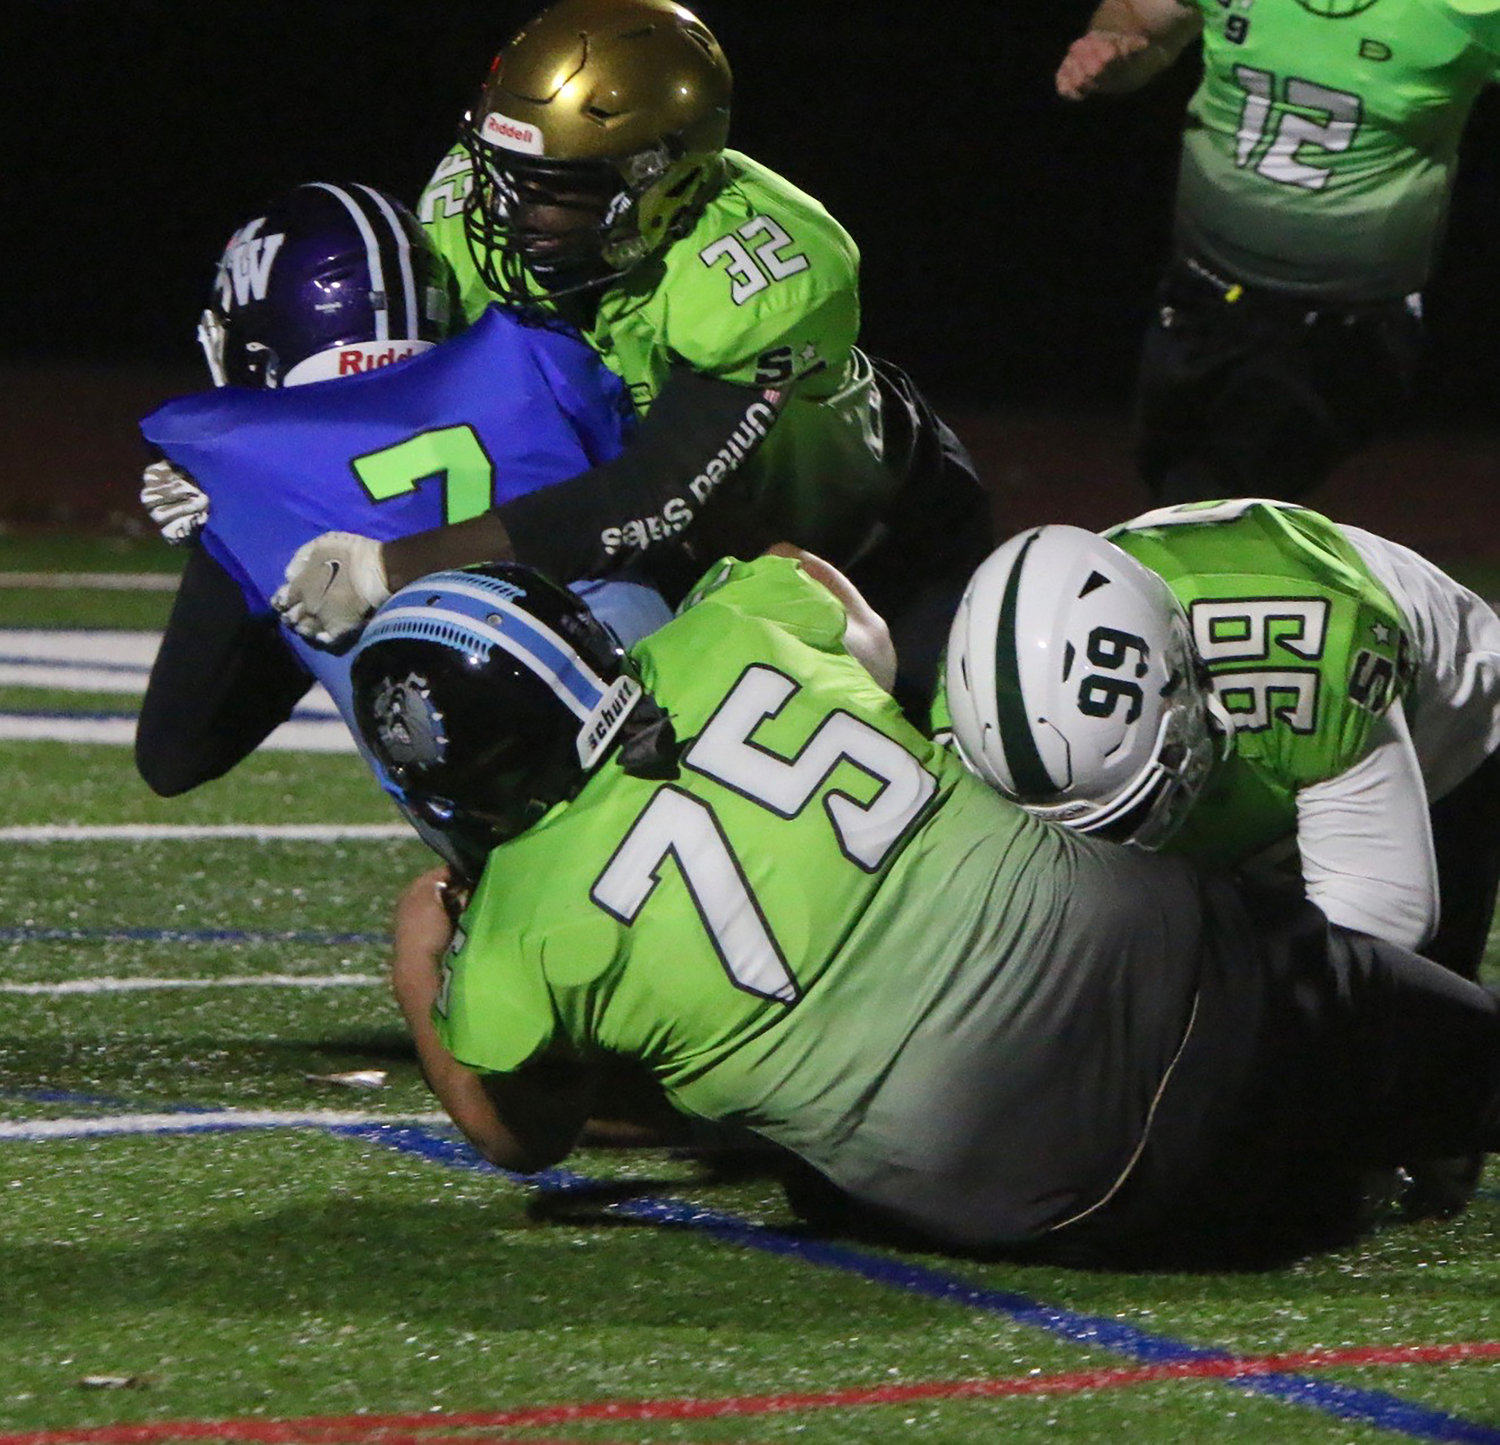 Sullivan West’s Chris Campanelli brings down Monroe-Woodbury running back Michael Zrelak. Campanelli is assisted by teammate linebacker James McGuinness from Washingtonville.